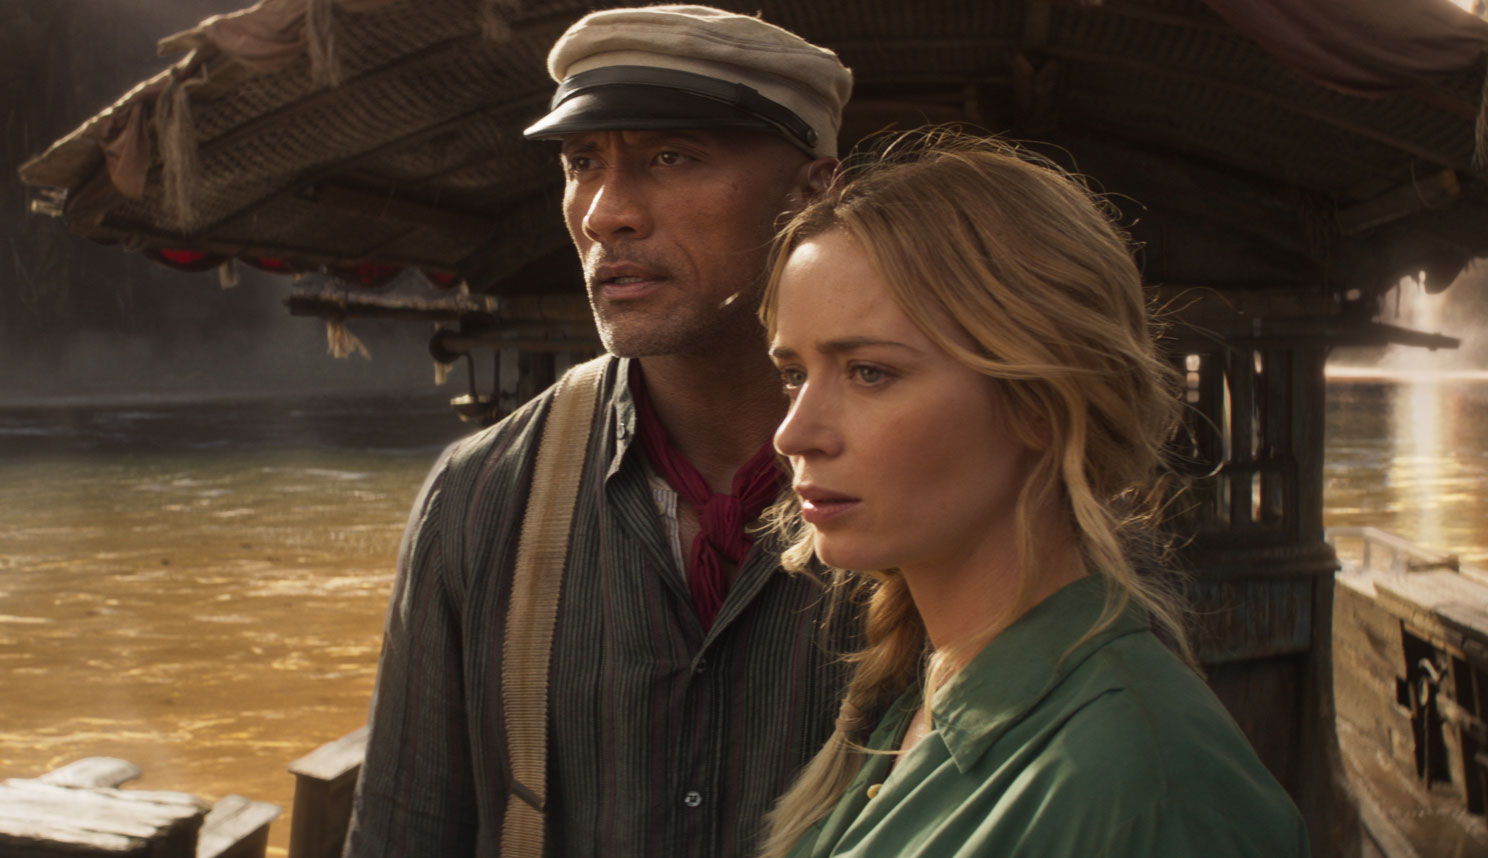 Dwayne Johnson and Emily Blunt in "Jungle Cruise"